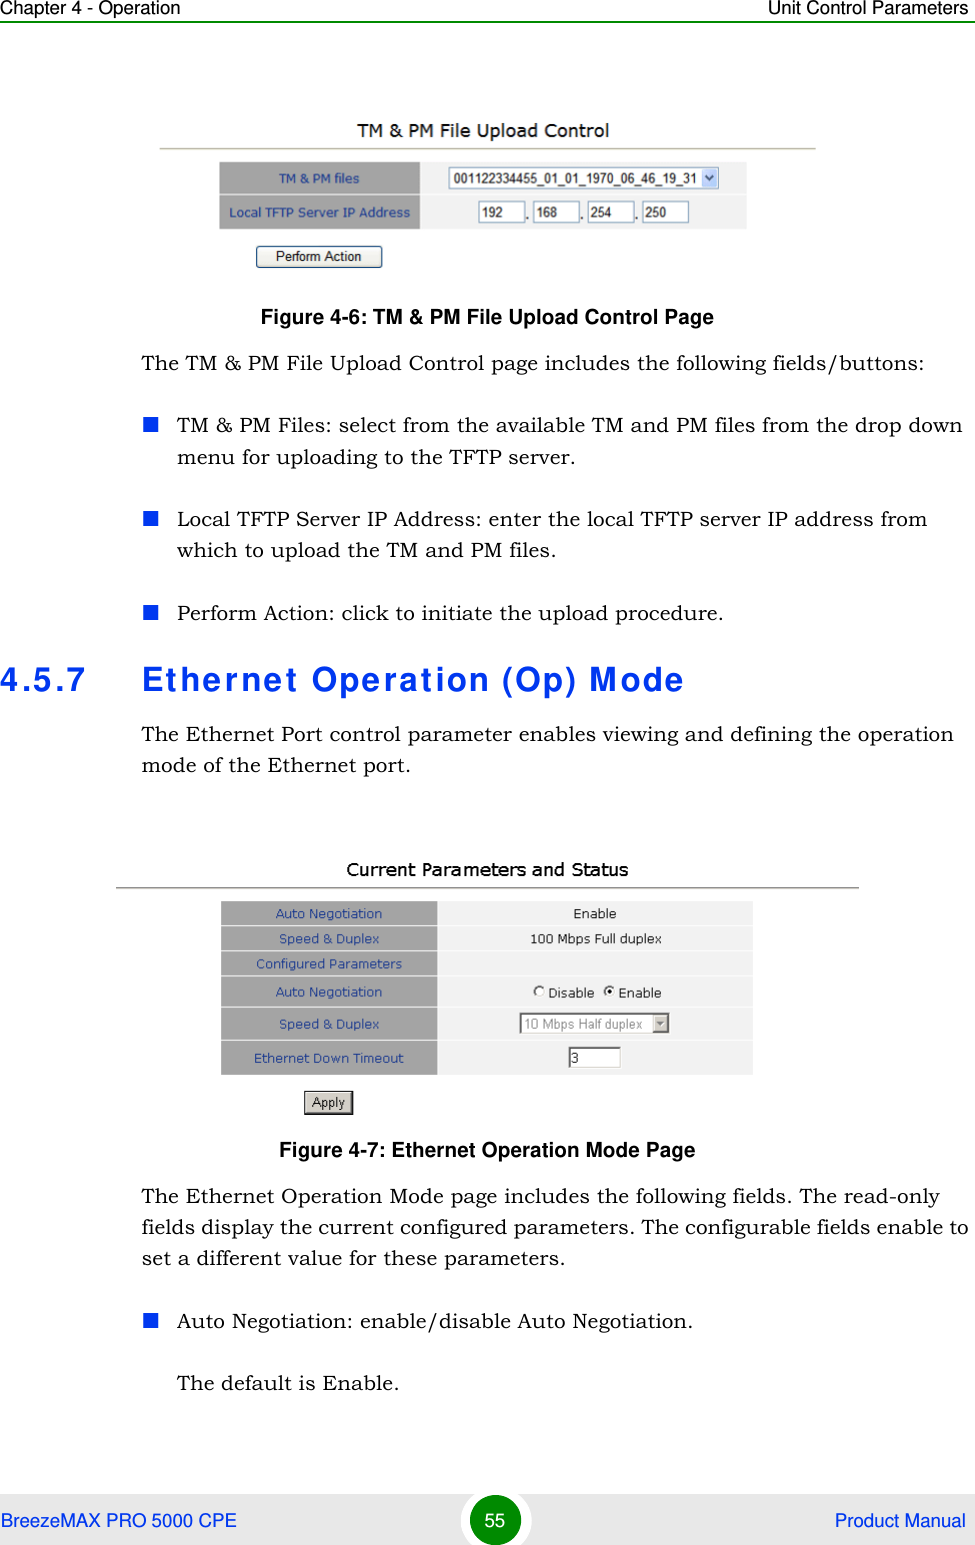 Chapter 4 - Operation Unit Control ParametersBreezeMAX PRO 5000 CPE 55  Product ManualThe TM &amp; PM File Upload Control page includes the following fields/buttons:TM &amp; PM Files: select from the available TM and PM files from the drop down menu for uploading to the TFTP server.Local TFTP Server IP Address: enter the local TFTP server IP address from which to upload the TM and PM files.Perform Action: click to initiate the upload procedure.4.5.7 Ethernet Operation (Op) ModeThe Ethernet Port control parameter enables viewing and defining the operation mode of the Ethernet port.The Ethernet Operation Mode page includes the following fields. The read-only fields display the current configured parameters. The configurable fields enable to set a different value for these parameters.Auto Negotiation: enable/disable Auto Negotiation.The default is Enable.Figure 4-6: TM &amp; PM File Upload Control PageFigure 4-7: Ethernet Operation Mode Page